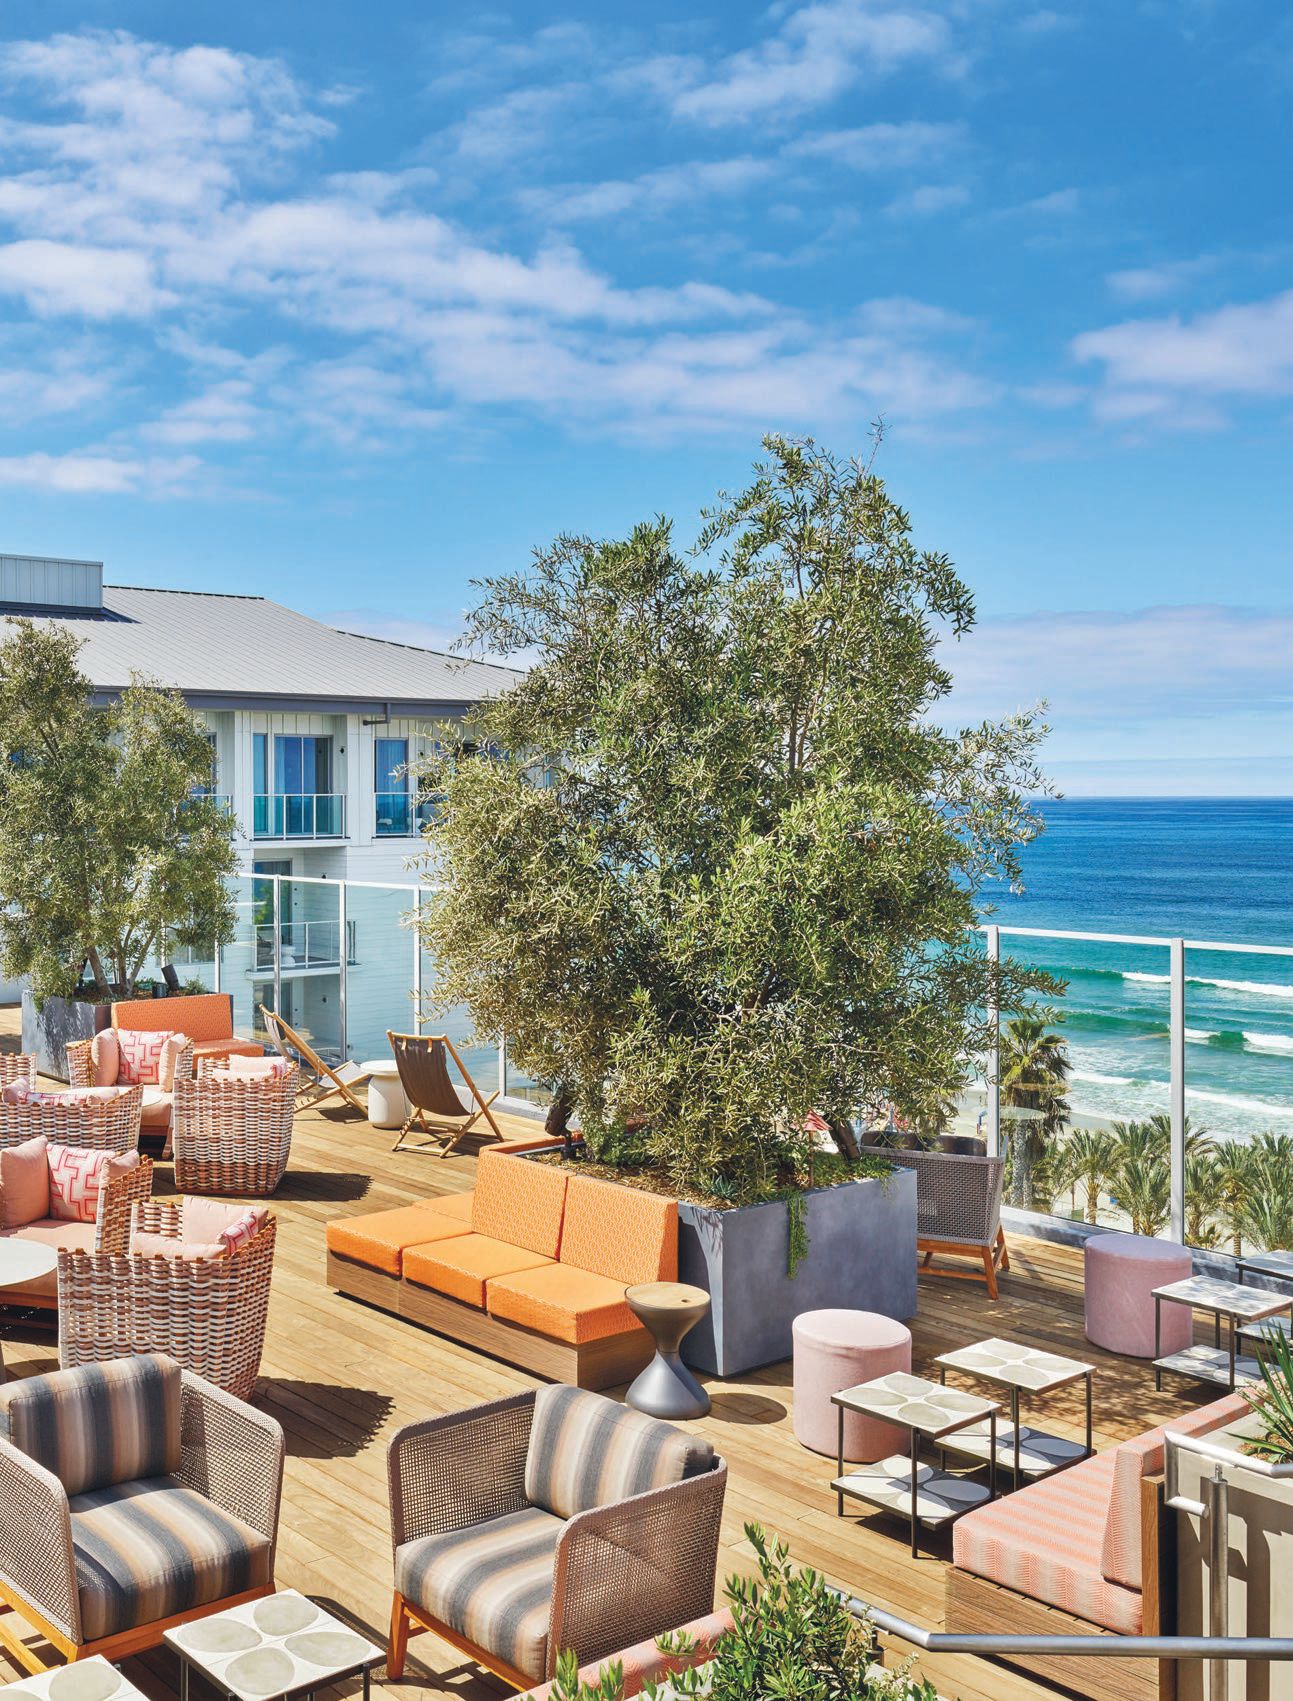 Soak up the salty air at The Rooftop Bar at Mission Pacific Hotel as you nosh on a menu created by chef Roberto Alcocer in collaboration with San Diego’s top surfers. PHOTO COURTESY OF SAVANNAH PLANT RIVERSIDE DISTRICT